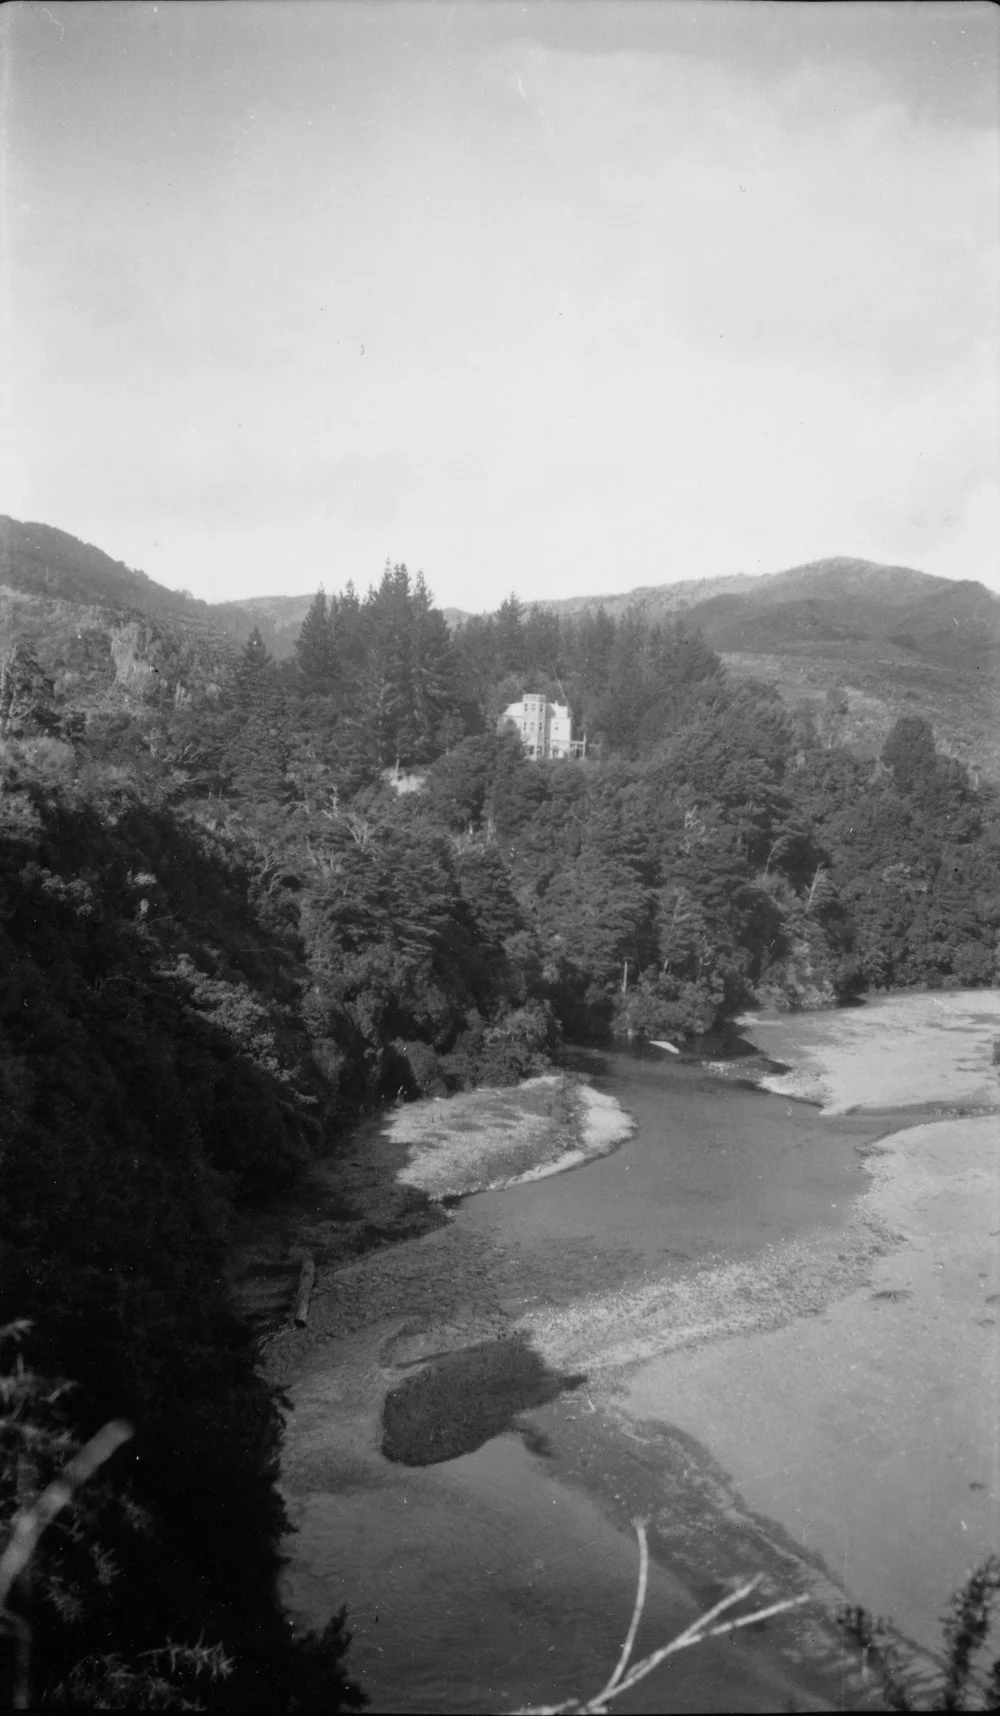 McCurdy's Castle with Te Awa Kairangi / Hutt River in foreground.